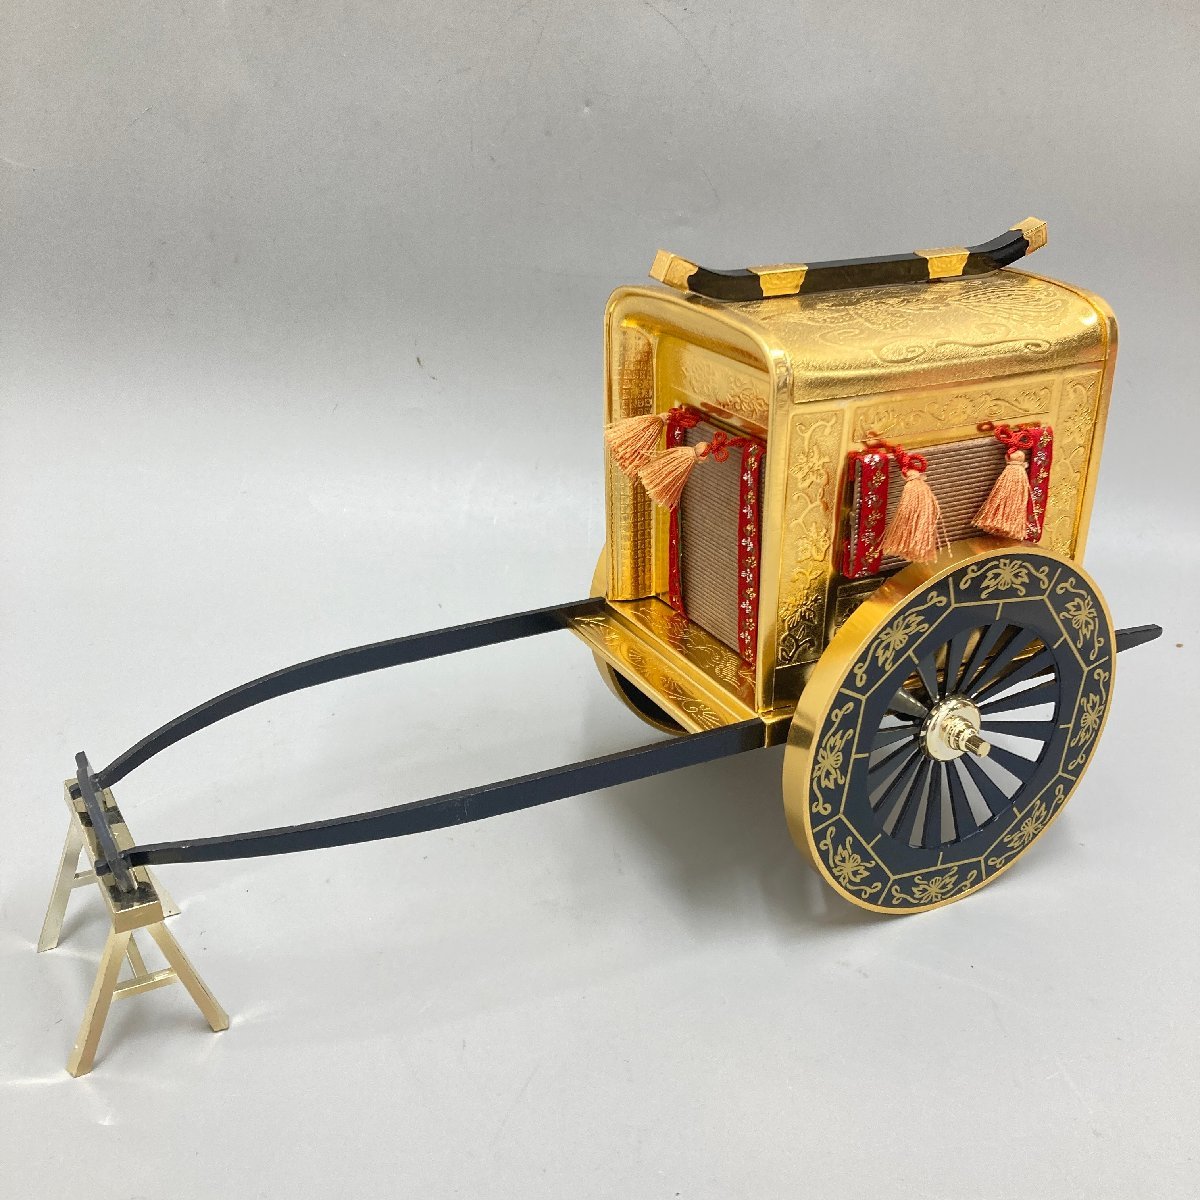 ◆◇[9] Imperial Palace Bullock Cart Crafts Ornament Hina Doll Good Condition 05/122609m◇◆, interior accessories, ornament, Japanese style